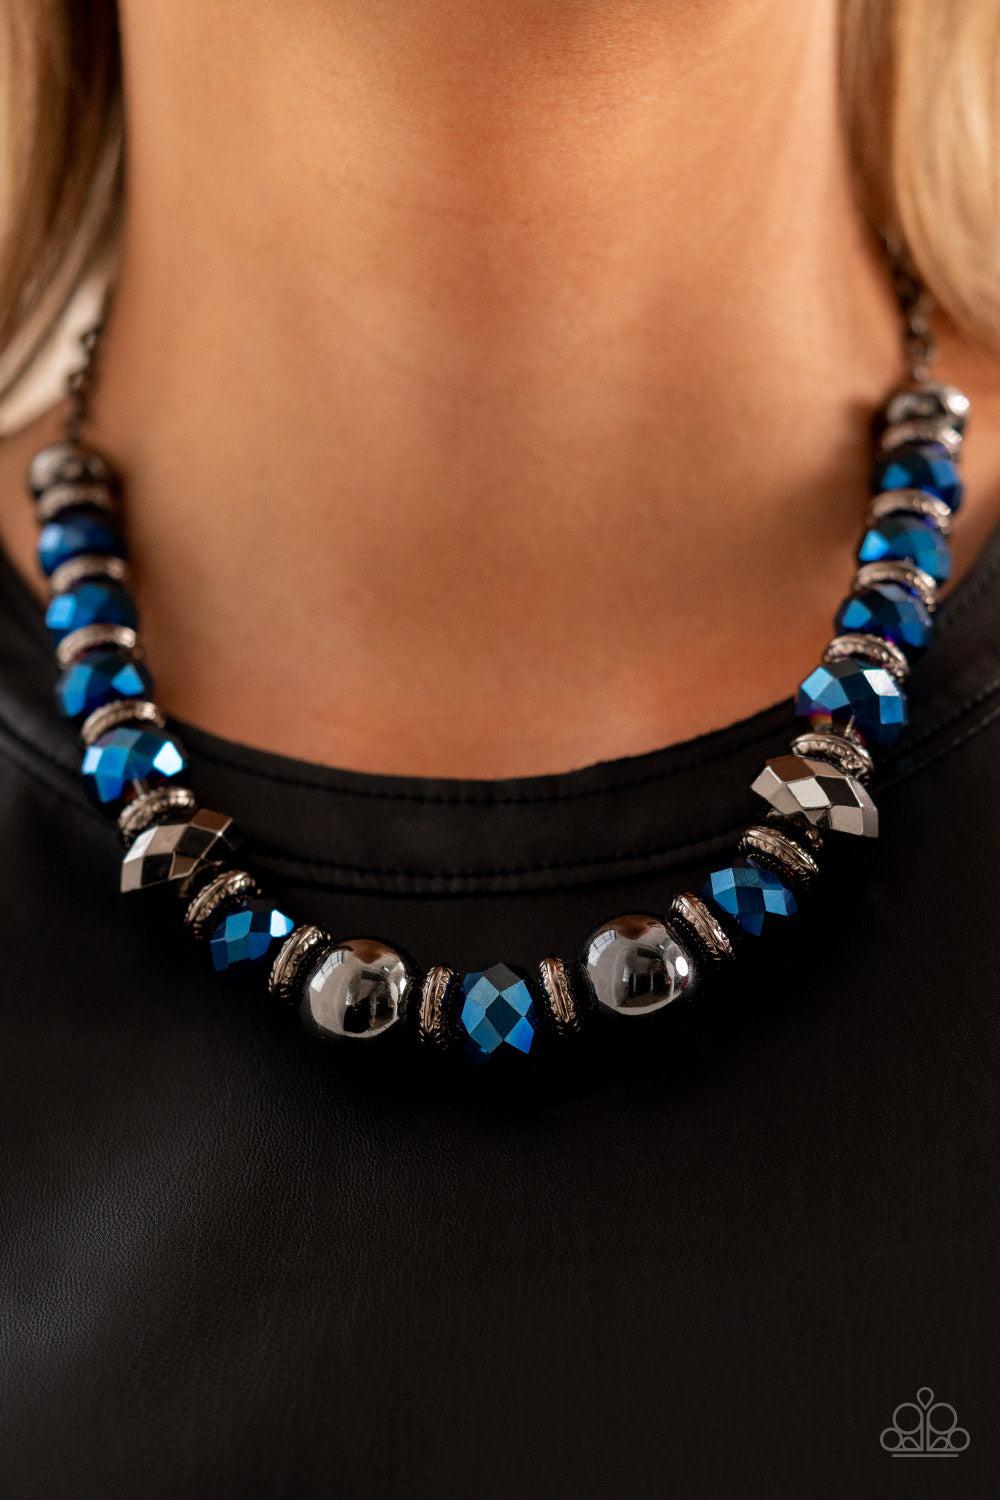 Interstellar Influencer Blue Necklace - Paparazzi Accessories-on model - CarasShop.com - $5 Jewelry by Cara Jewels